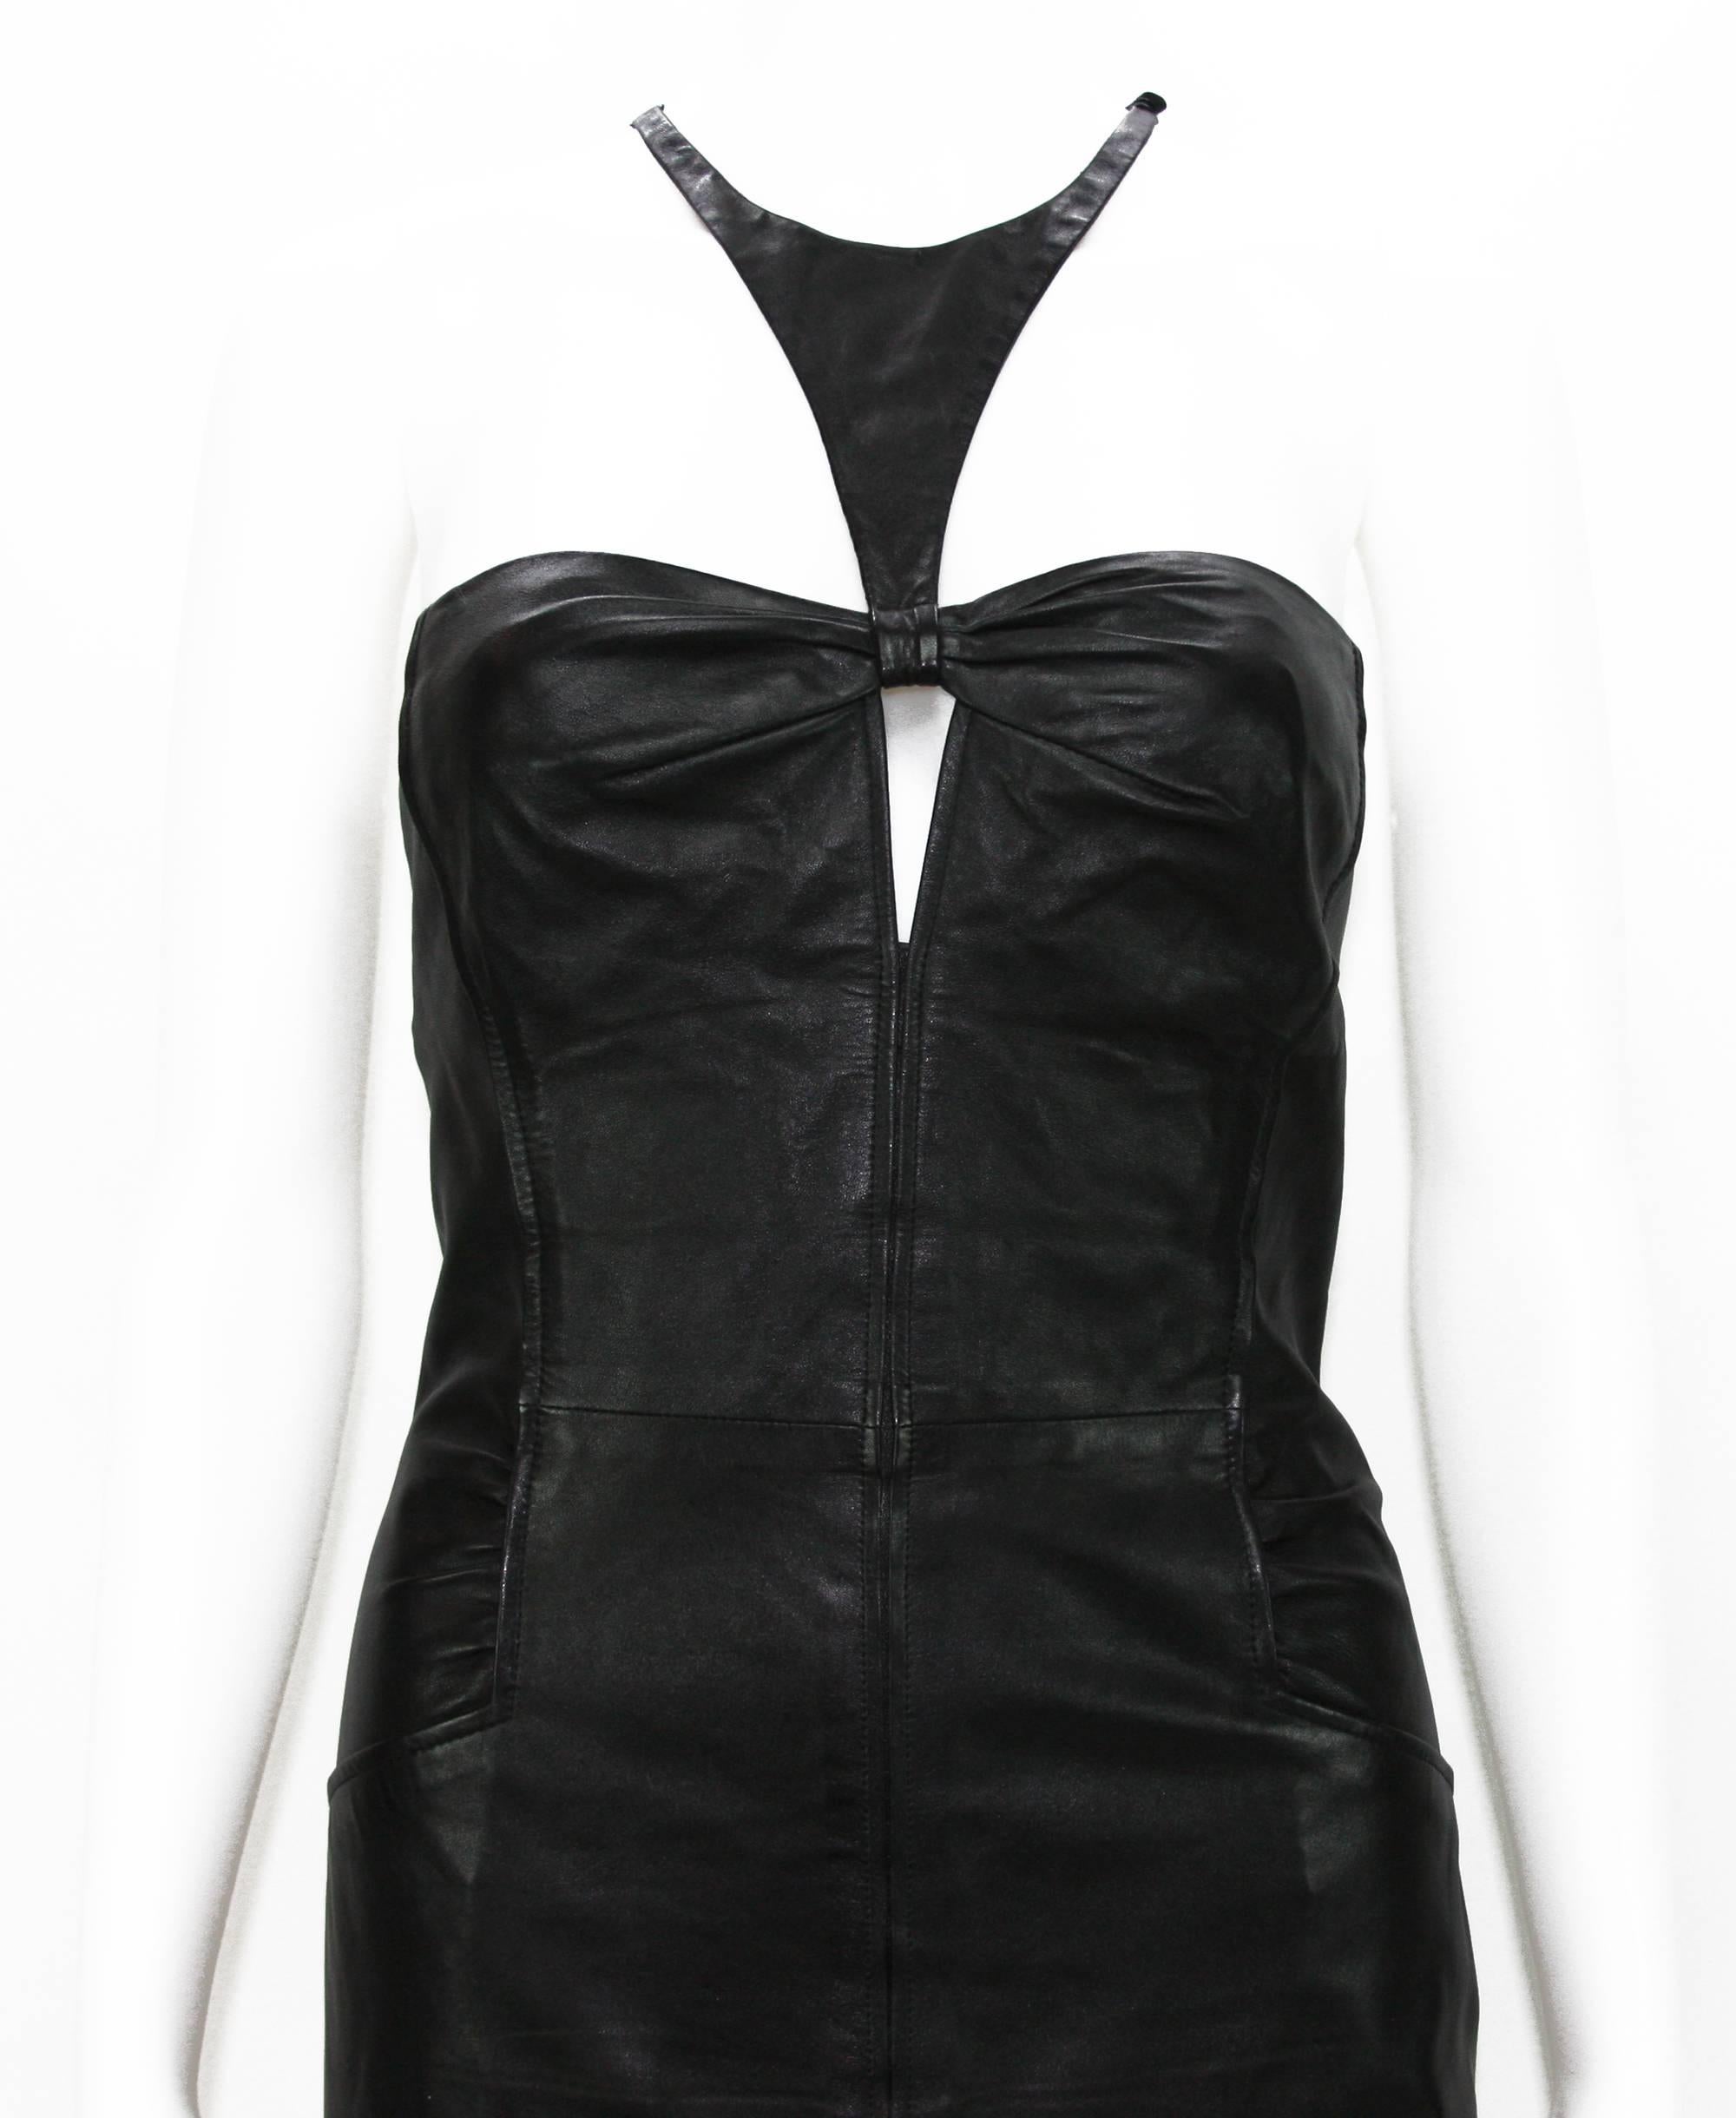 Tom Ford for Gucci 2004 Collection Black Leather Cocktail Dress 44 1